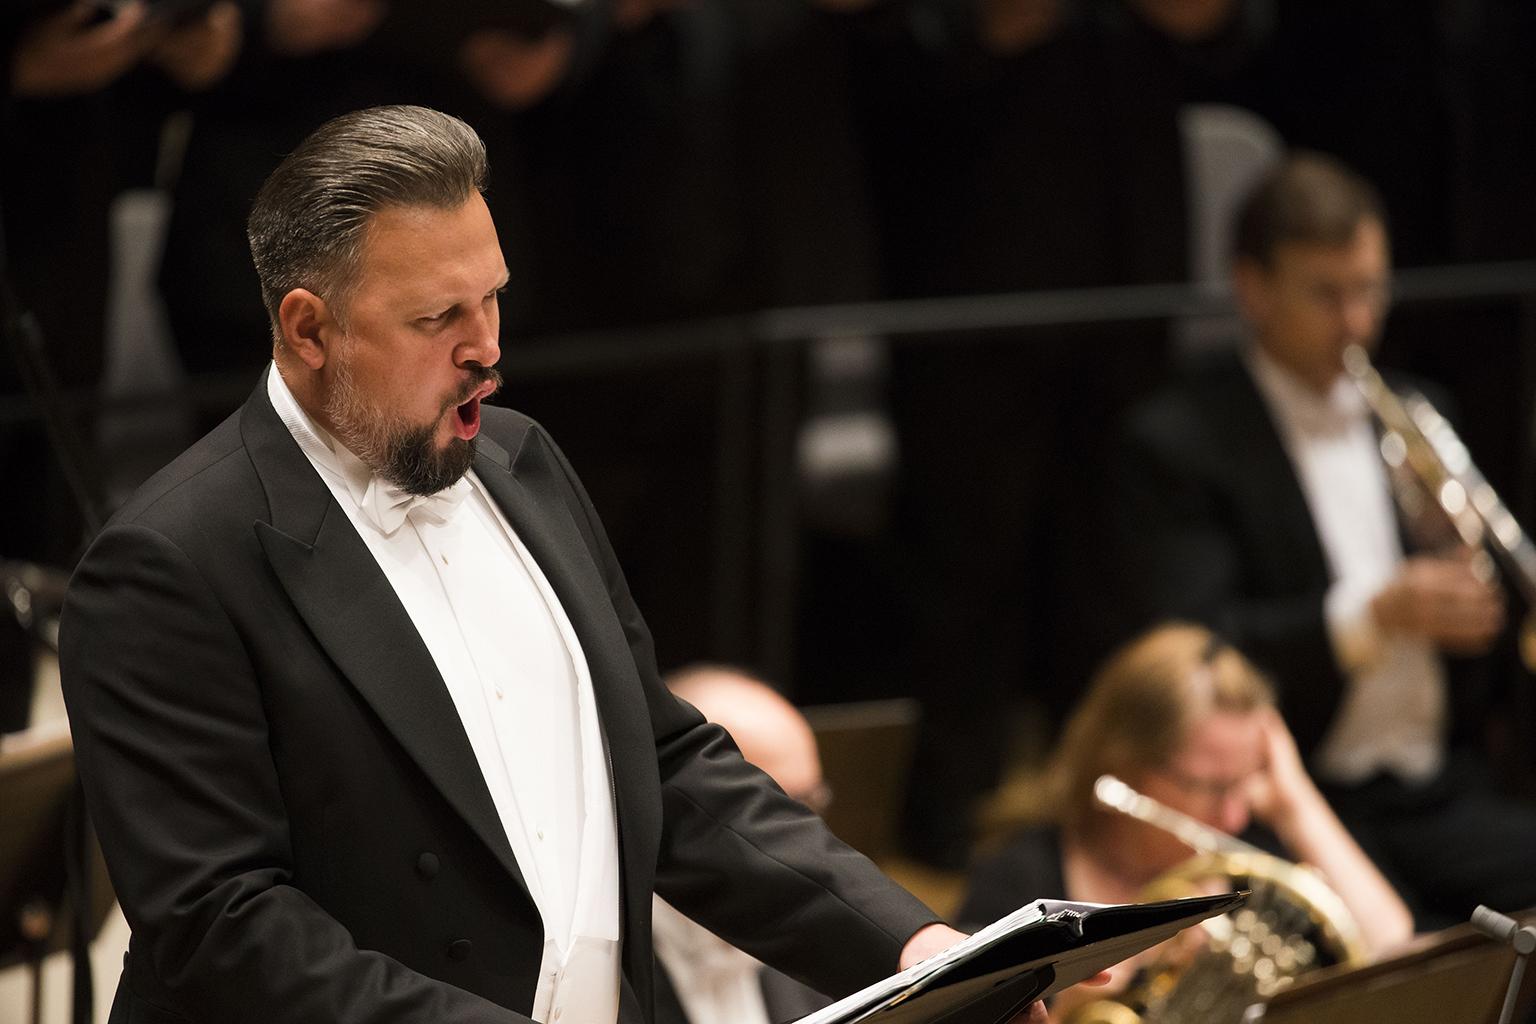 Russian Bass Alexey Tikhomirov makes his CSO debut in Shostakovich’s Symphony No. 13 (“Babi Yar”) with the Orchestra and Men of the Chicago Symphony Chorus led by Zell Music Director Riccardo Muti. (Photo credit: Todd Rosenberg)